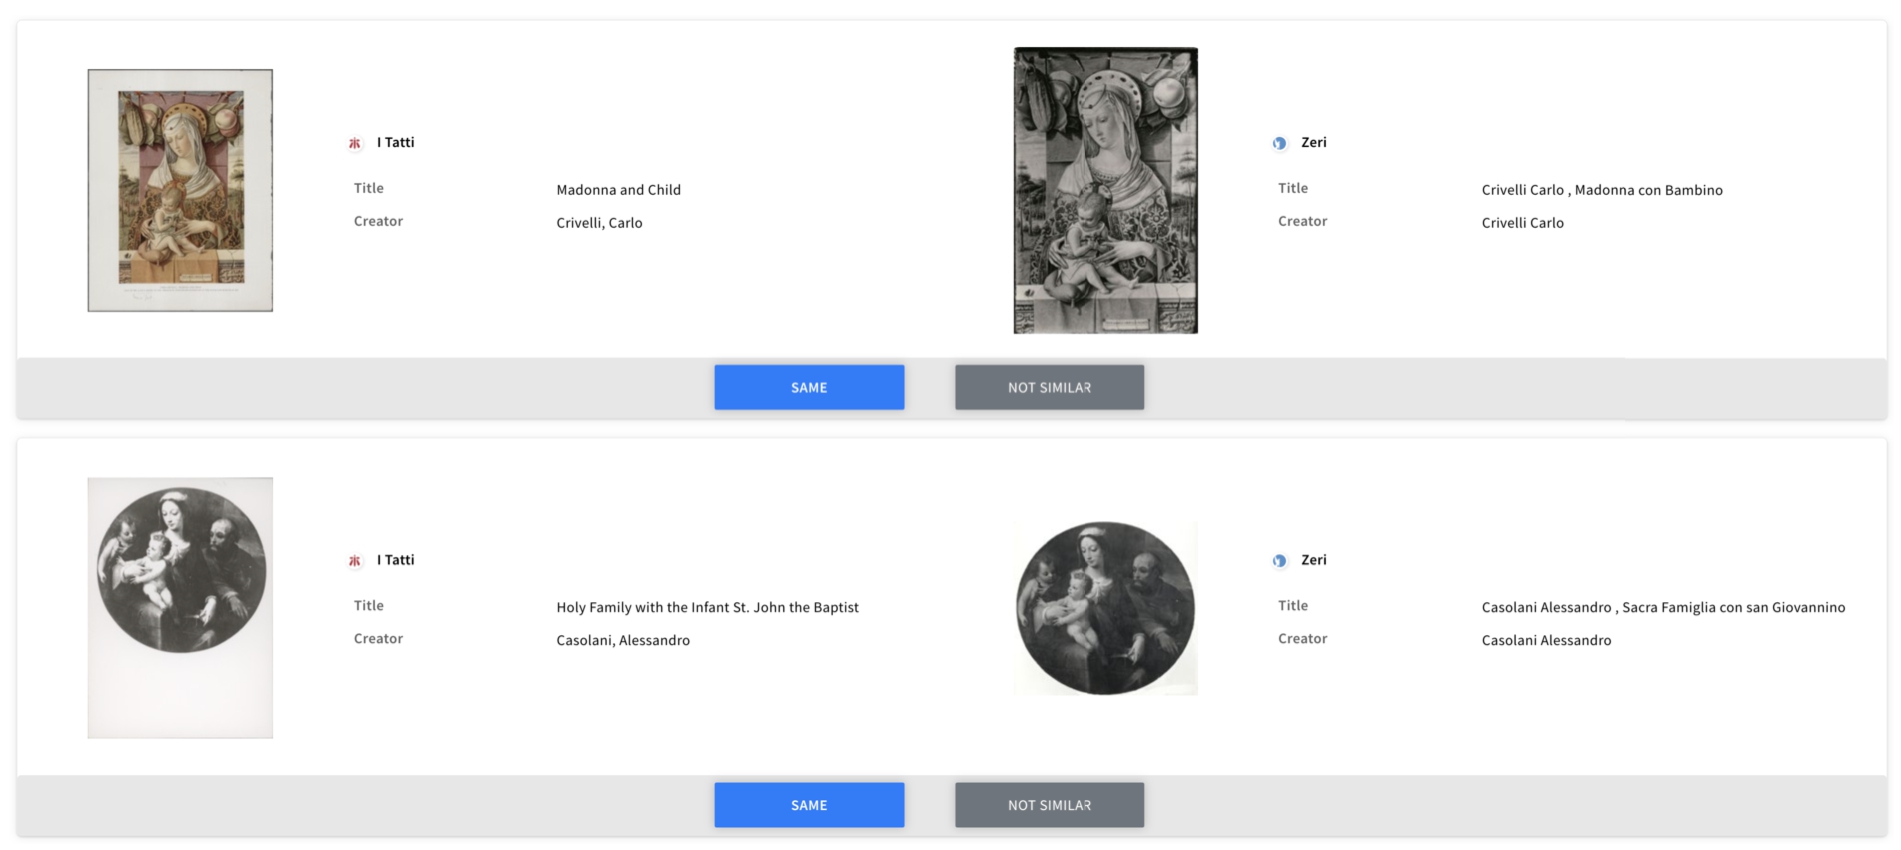 Simplified view: comparing images and metadata from Pharos collections.